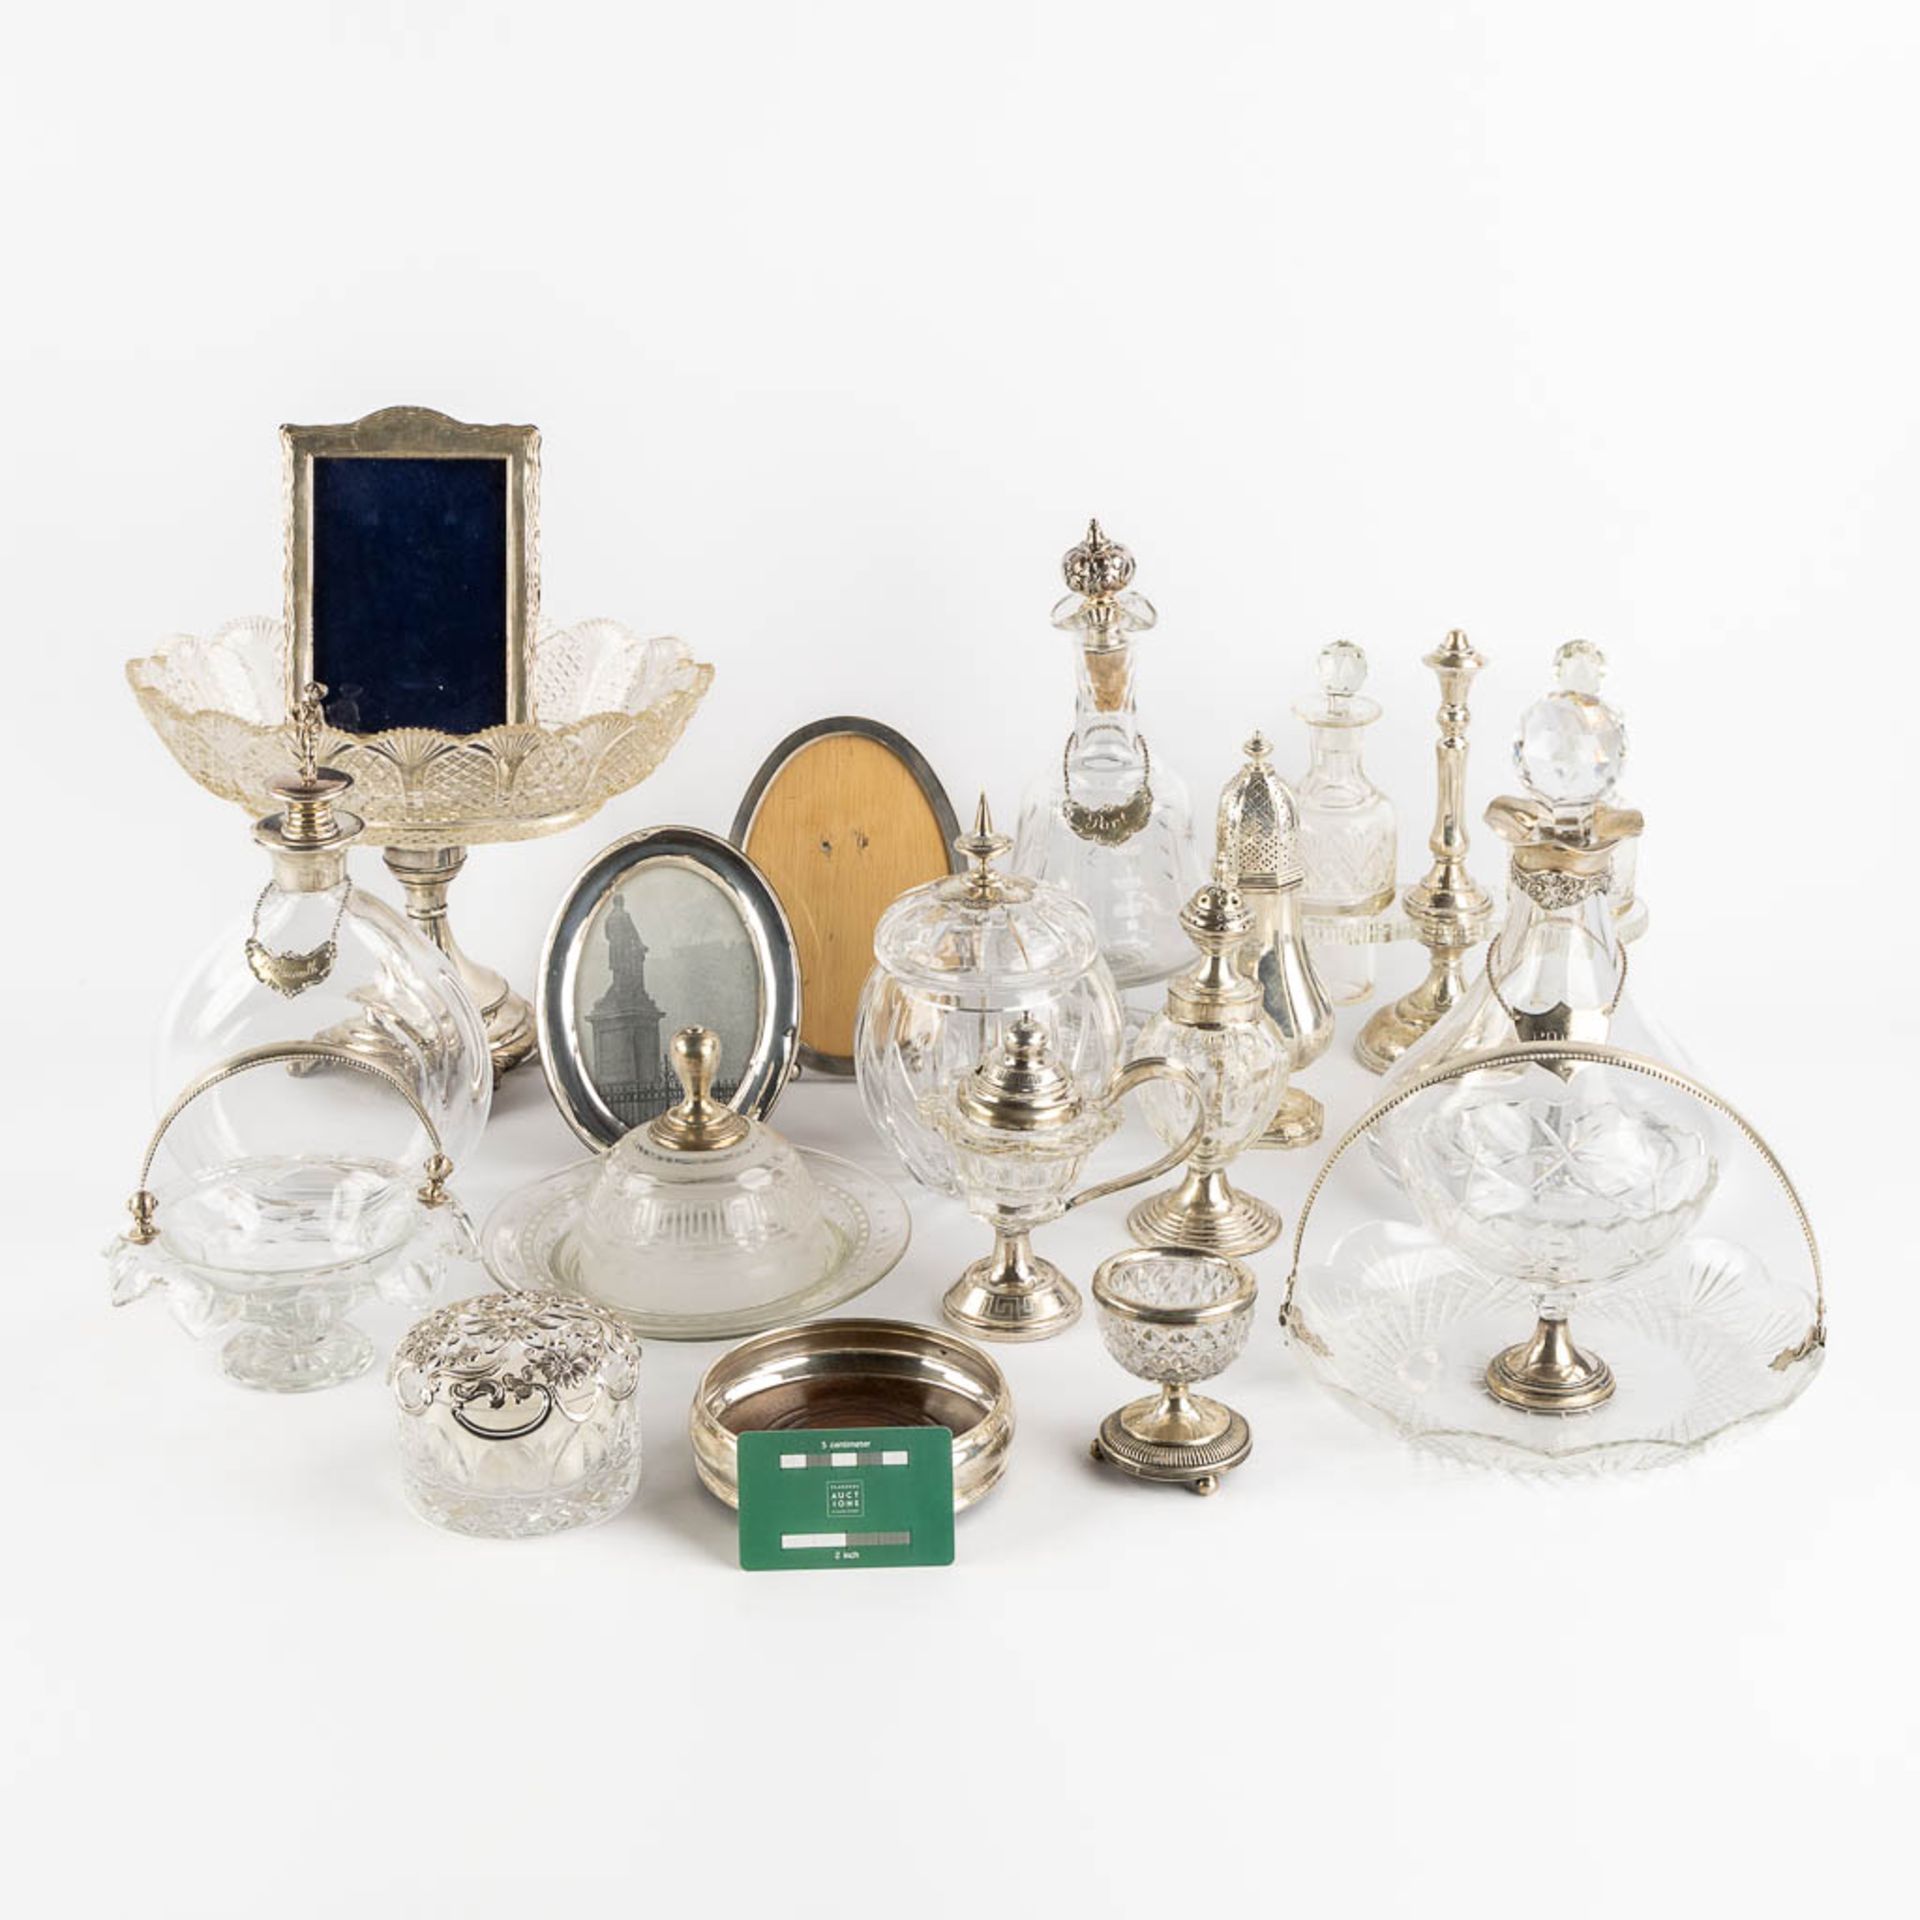 A large collection of silver and glass items, picture frames, serving ware and table accessories. 19 - Image 2 of 19